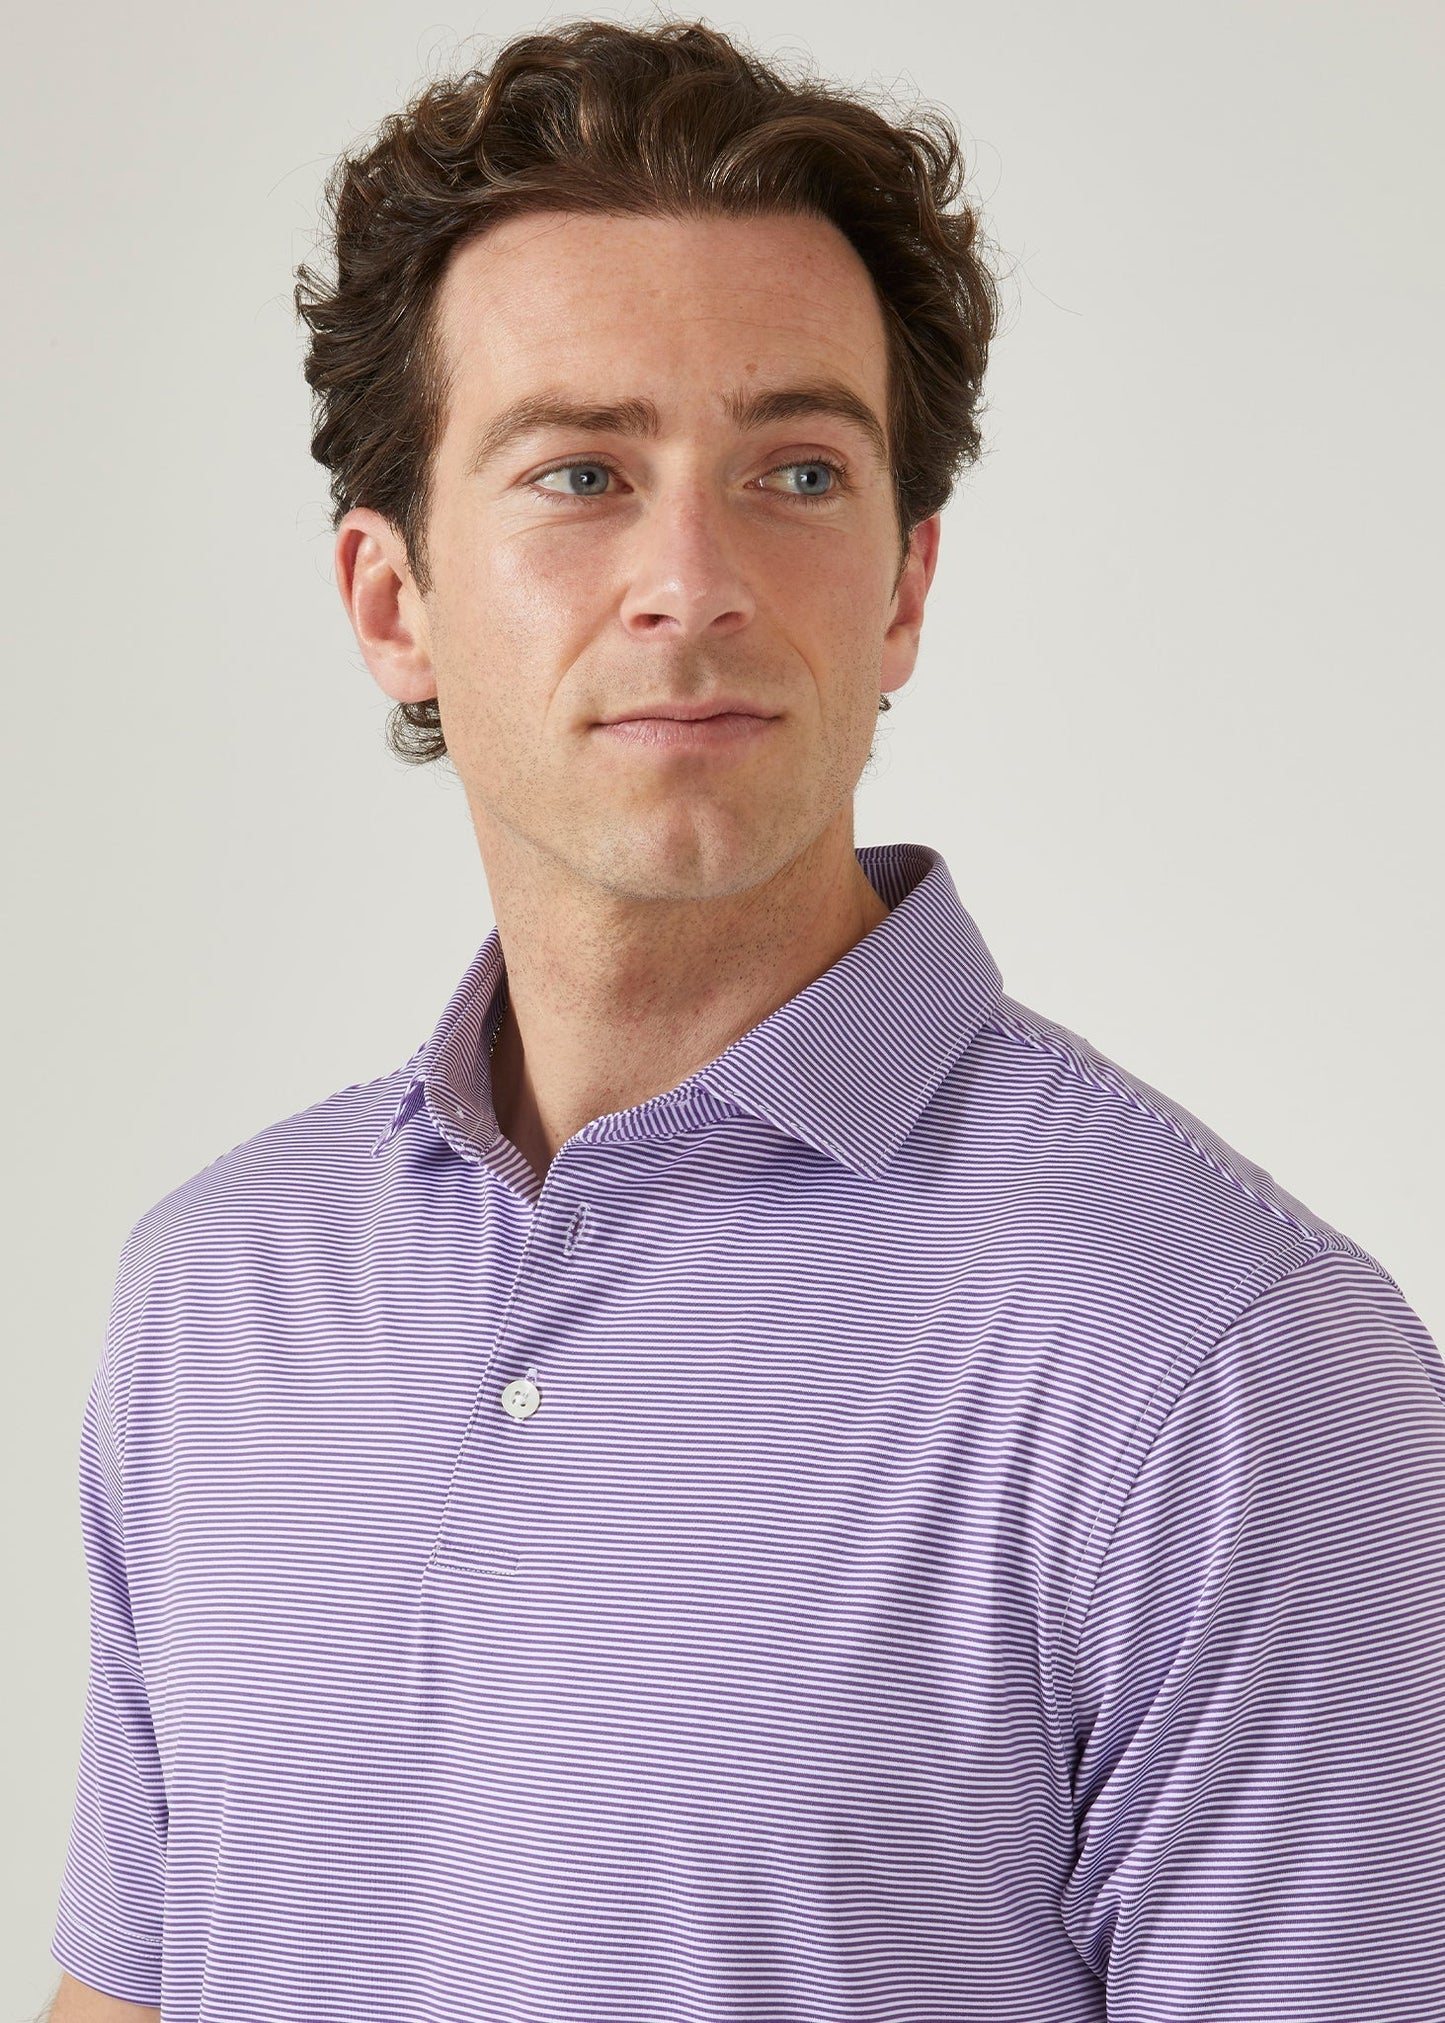 Polo shirt made from polyester with 3 button collar in plum with white stipes.